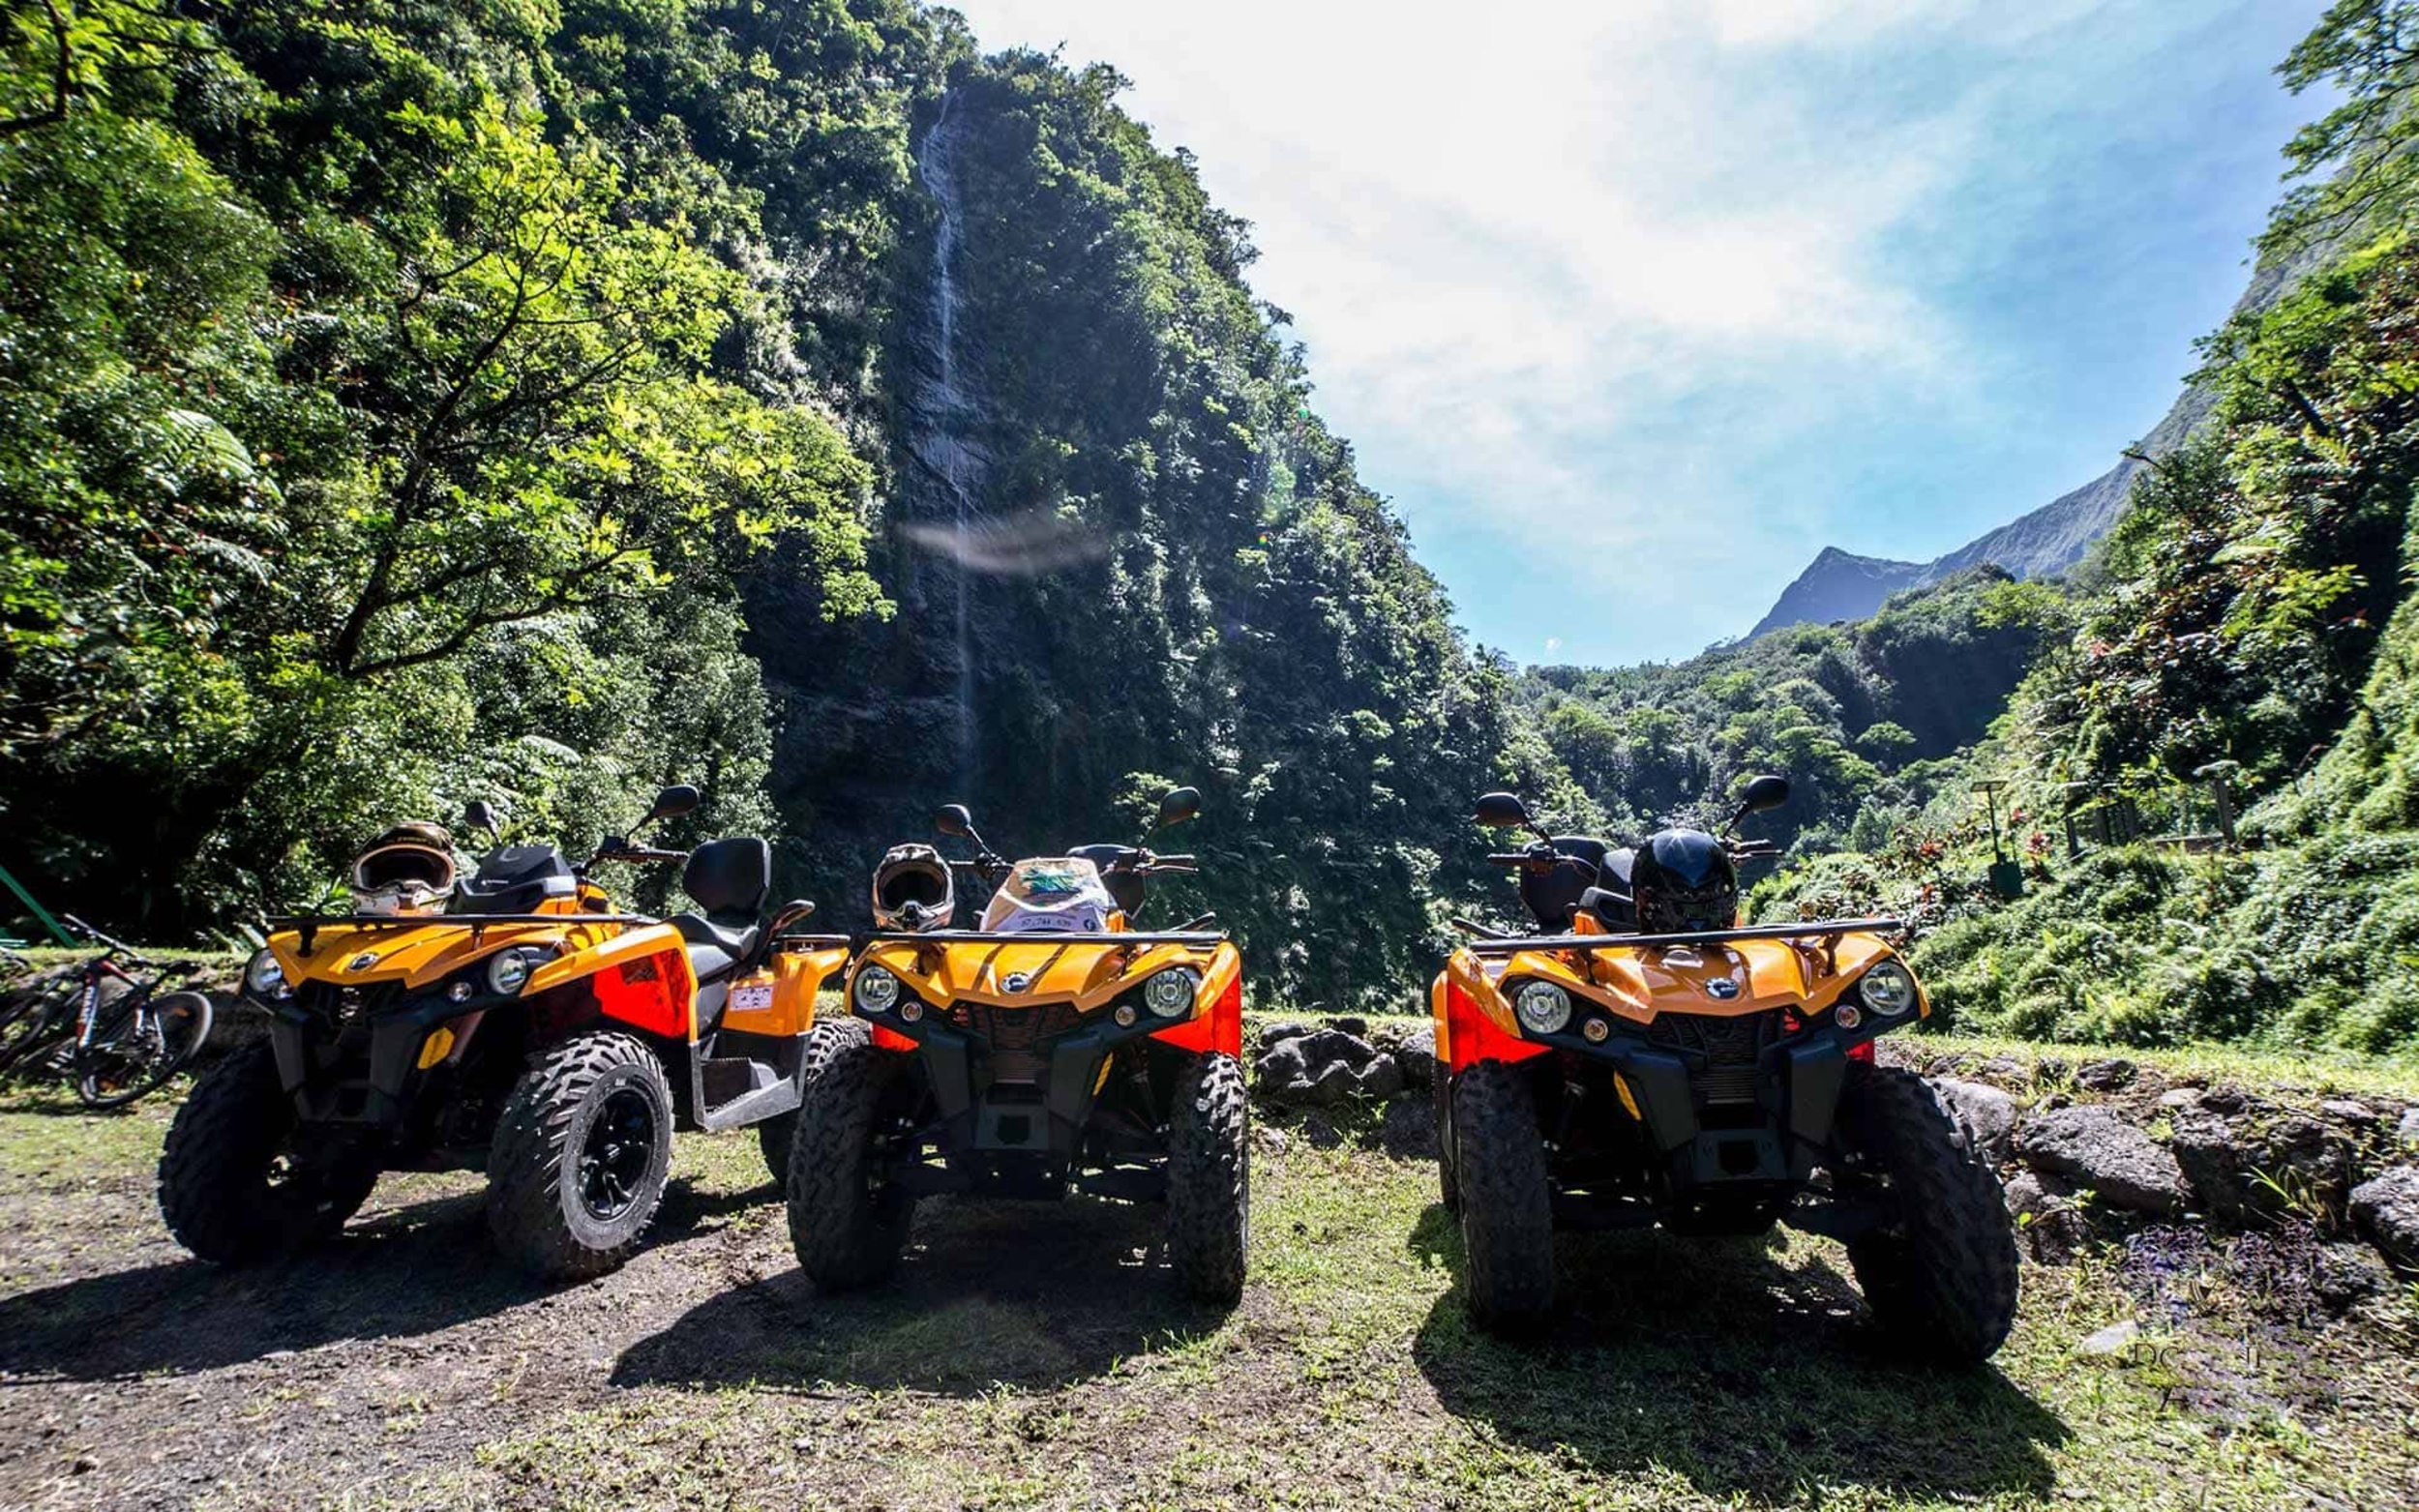 <p>ATV tours are a great way to see the jungle while learning about the island's history. Whether you're an adrenaline junkie or a family on vacation, this is a fun way to explore Tahiti's rugged side.</p><p><a href='https://www.msn.com/en-us/community/channel/vid-cj9pqbr0vn9in2b6ddcd8sfgpfq6x6utp44fssrv6mc2gtybw0us'>Follow us on MSN to see more of our exclusive lifestyle content.</a></p>